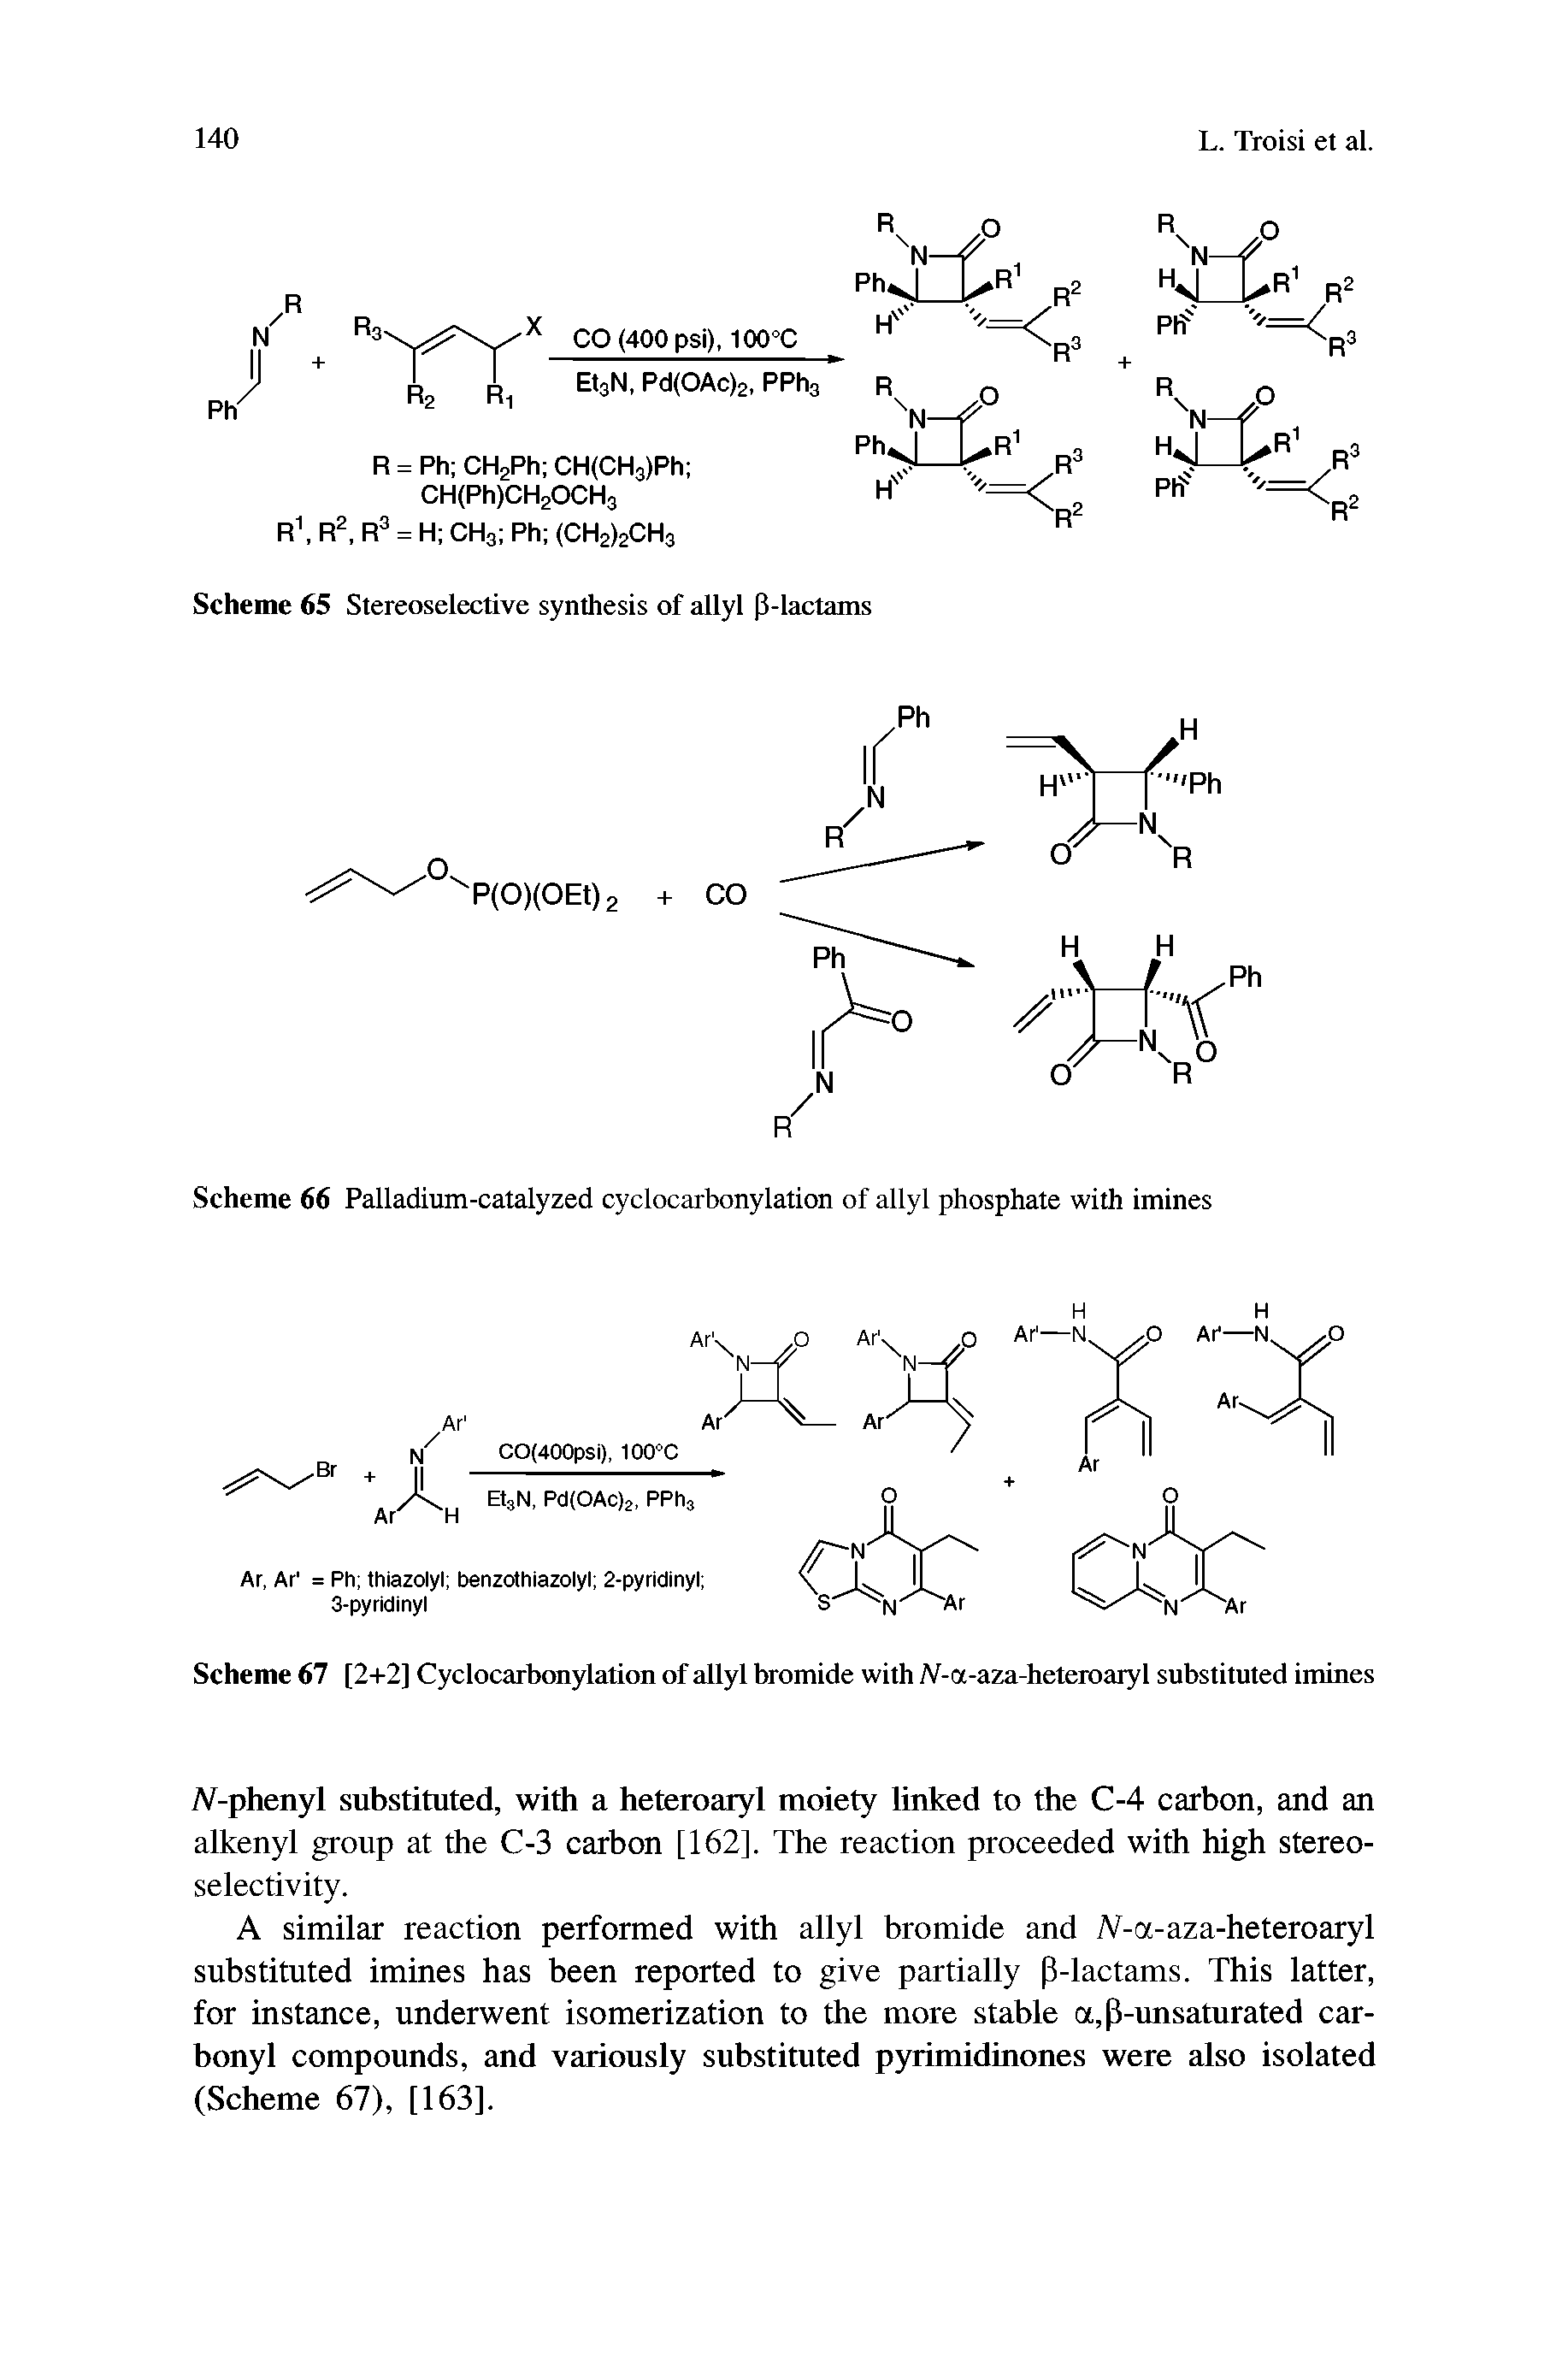 Scheme 67 [2+2] Cyclocarbonylation of allyl bromide with IV-a-aza-heteroaryl substituted imines...